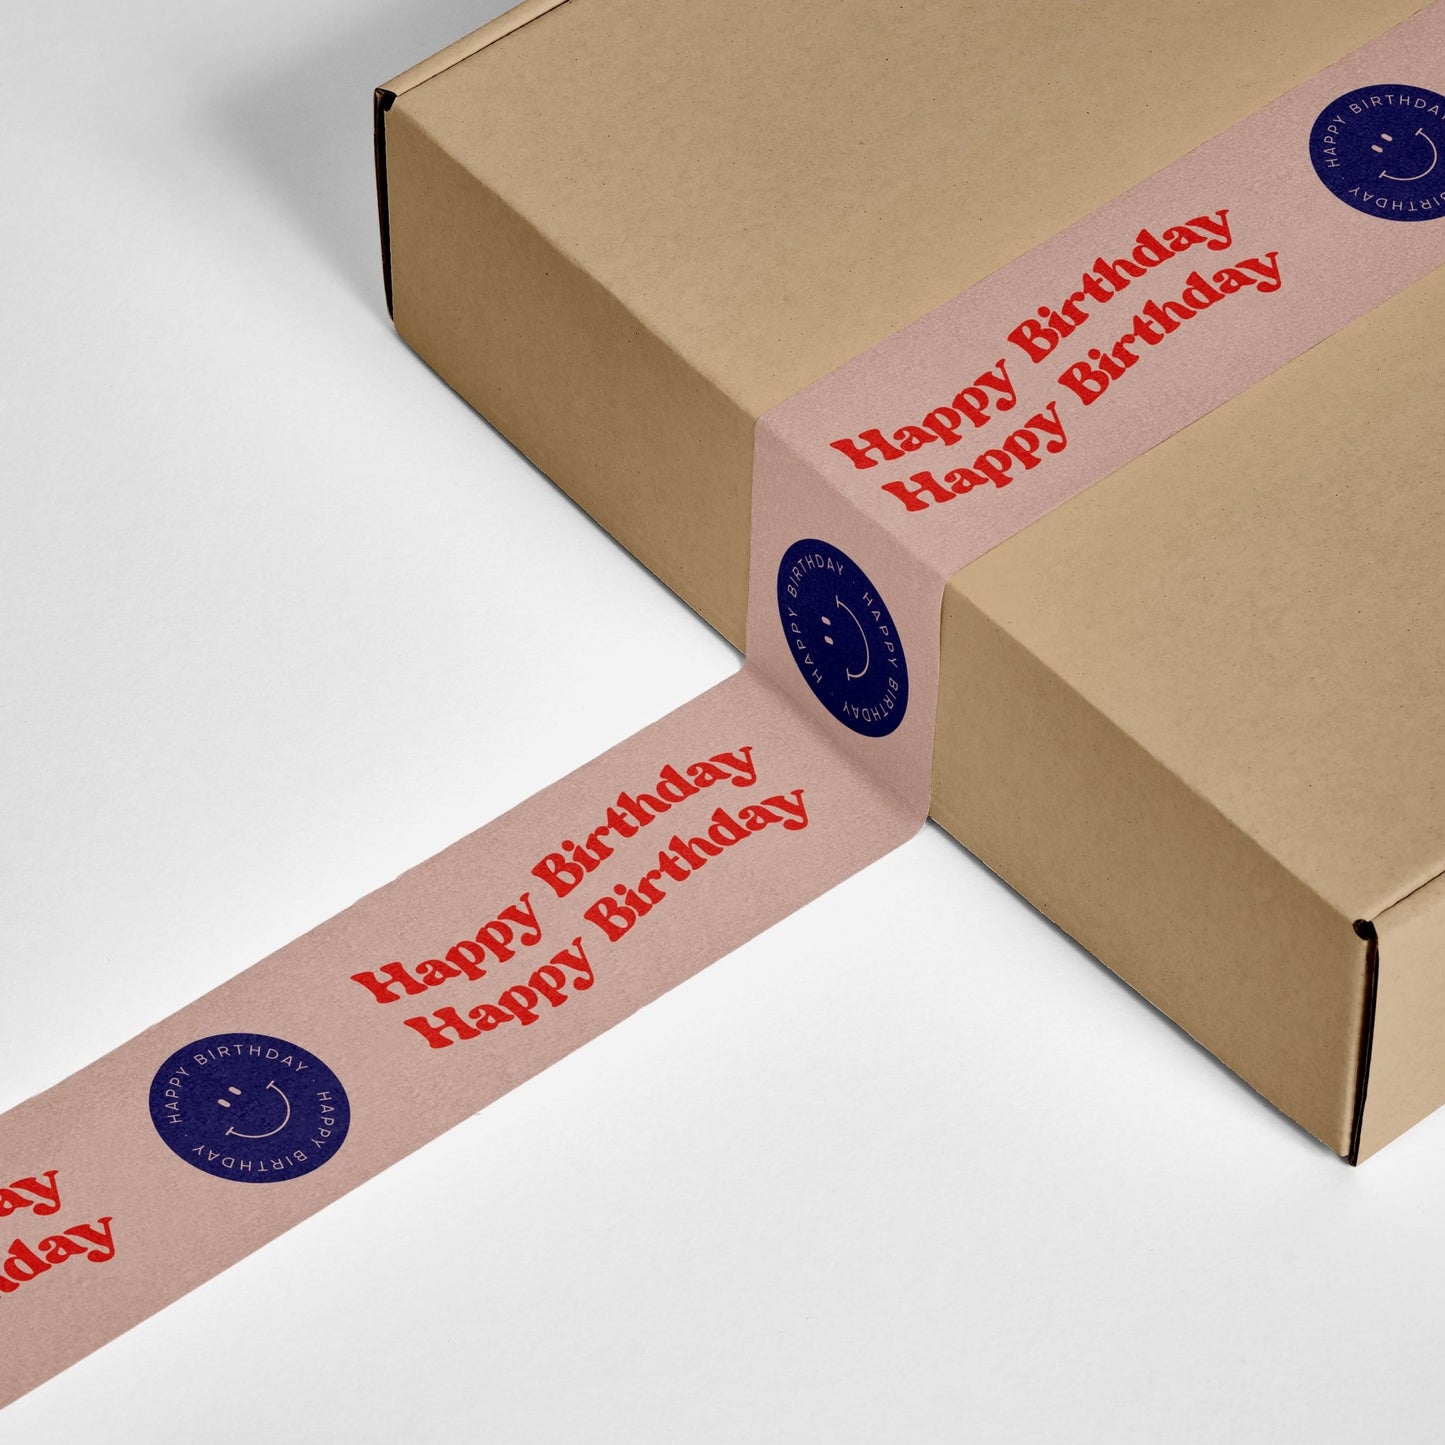 Birthday Tape, Eco Packaging, Happy Birthday, Gift Tape, Recyclable 